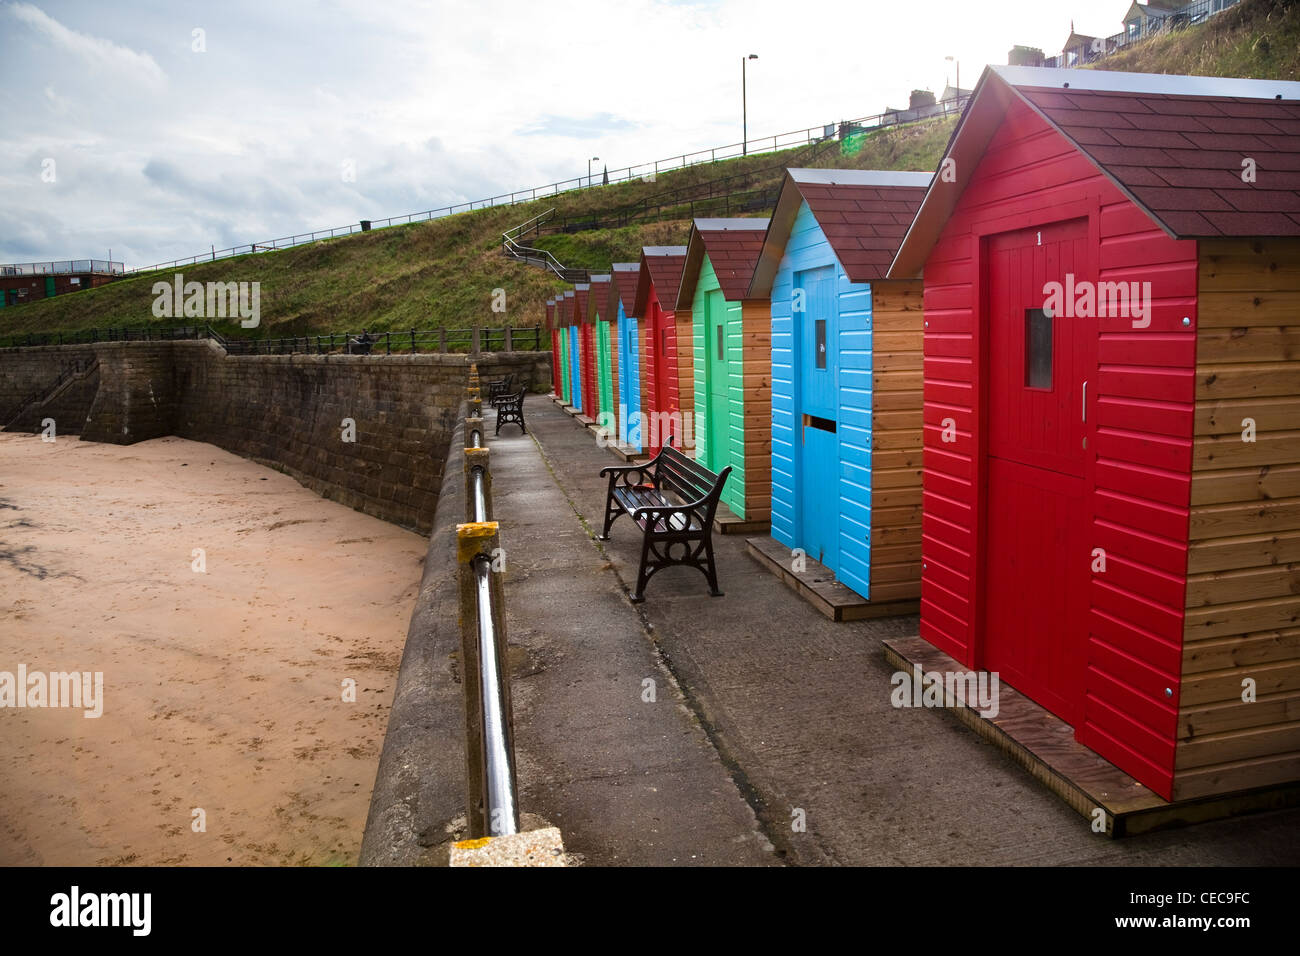 Colourful Beach huts, Cullercoats, Tynemouth. England uk. Stock Photo